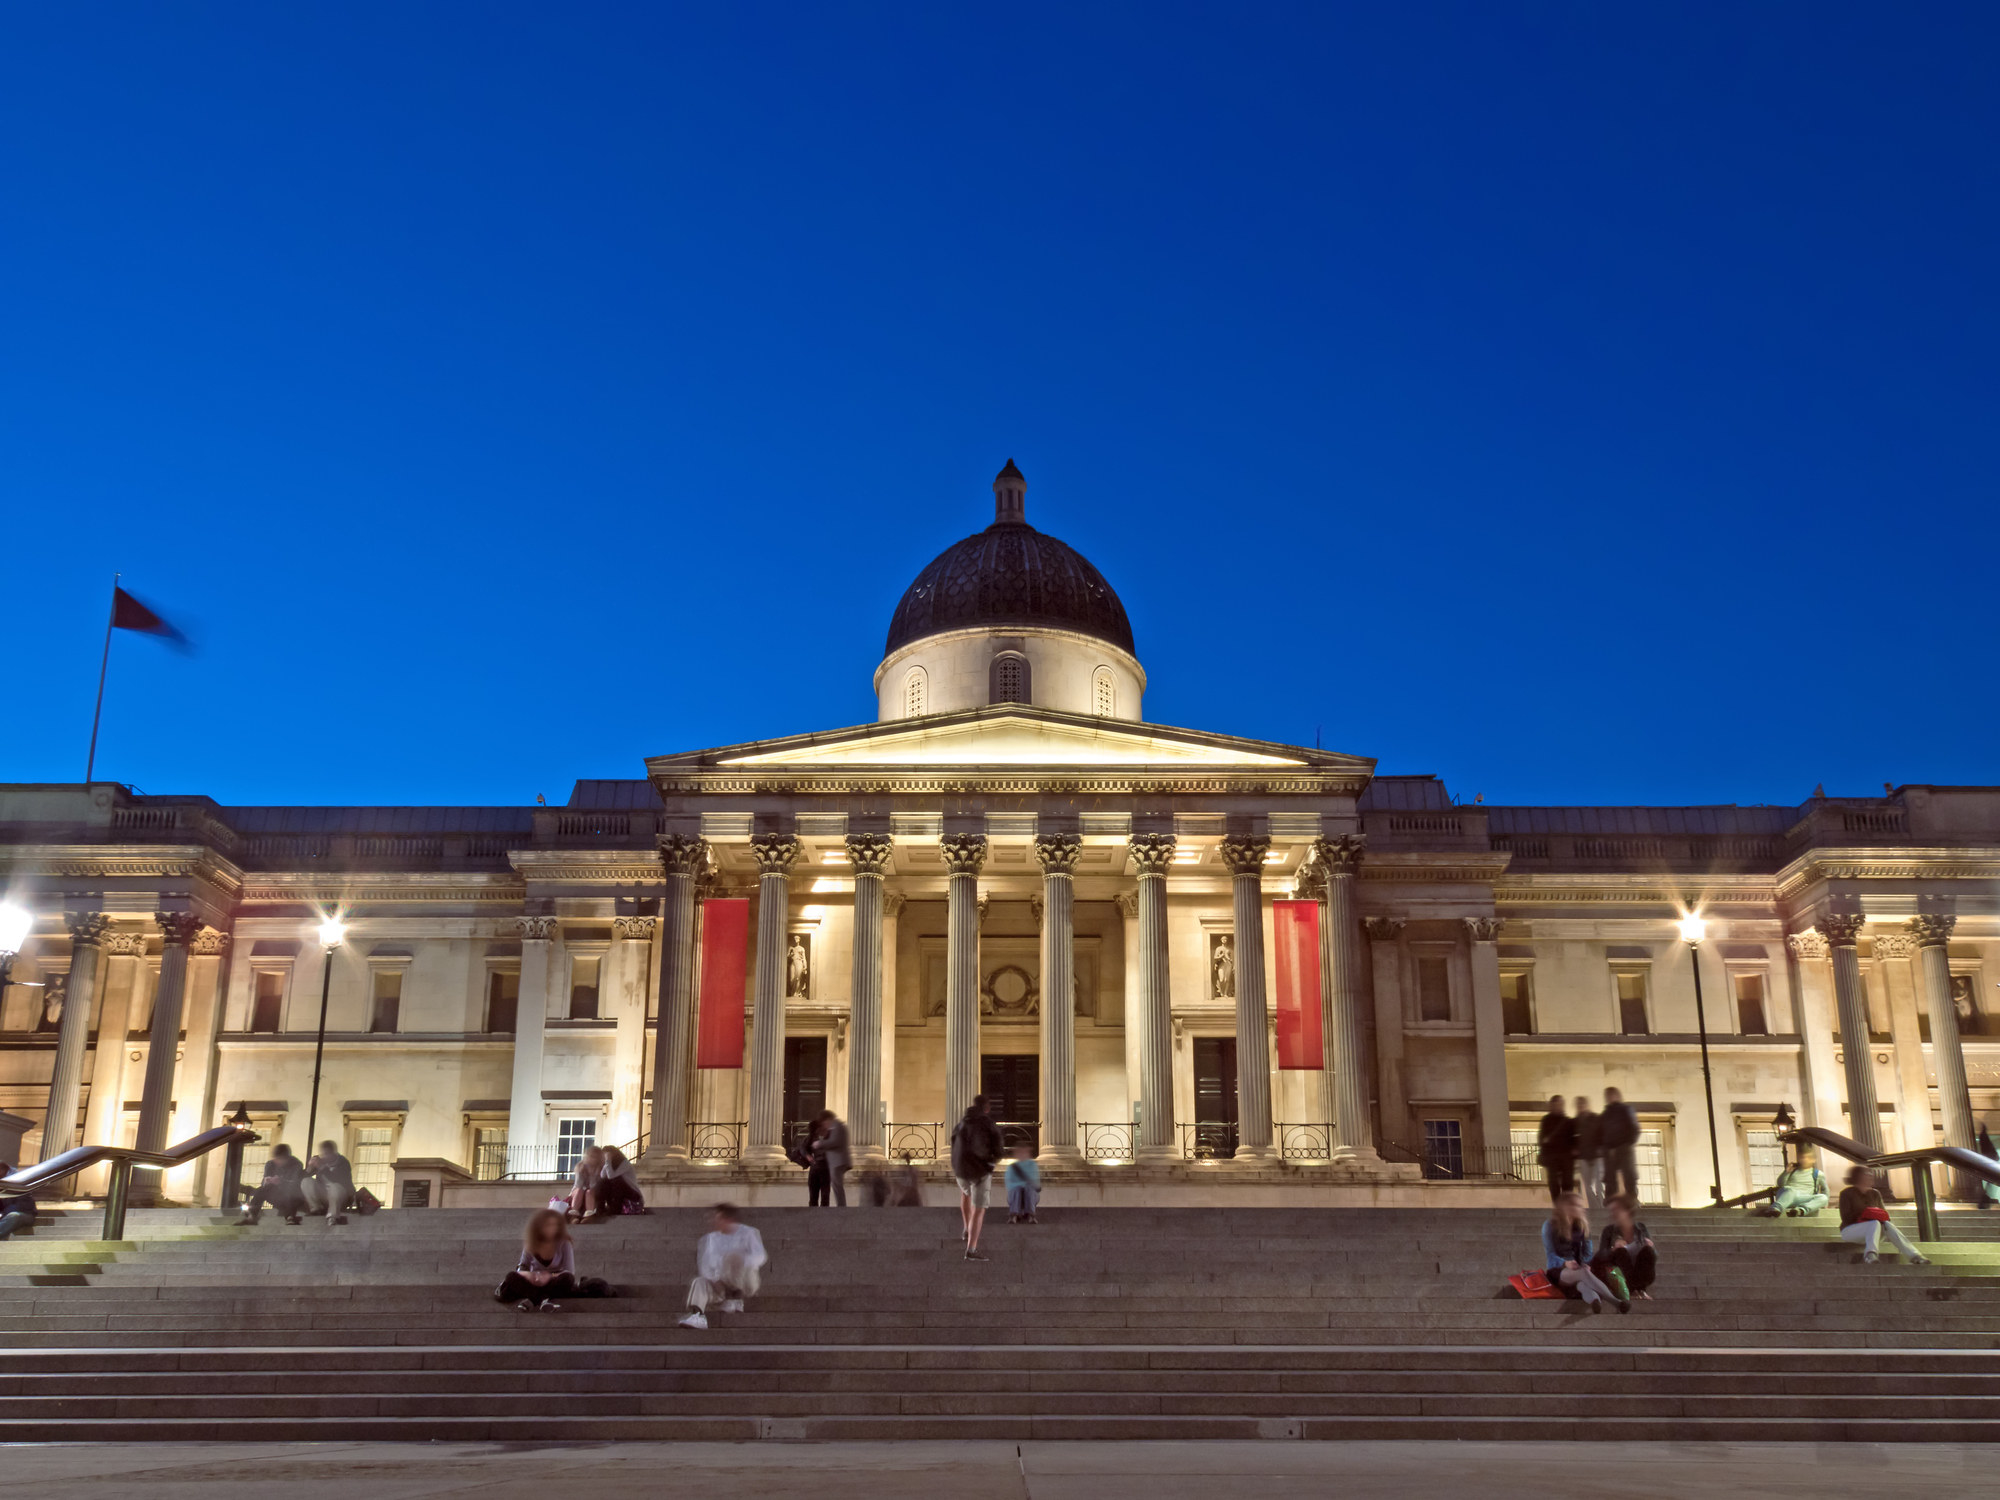 National Gallery in London at dusk.